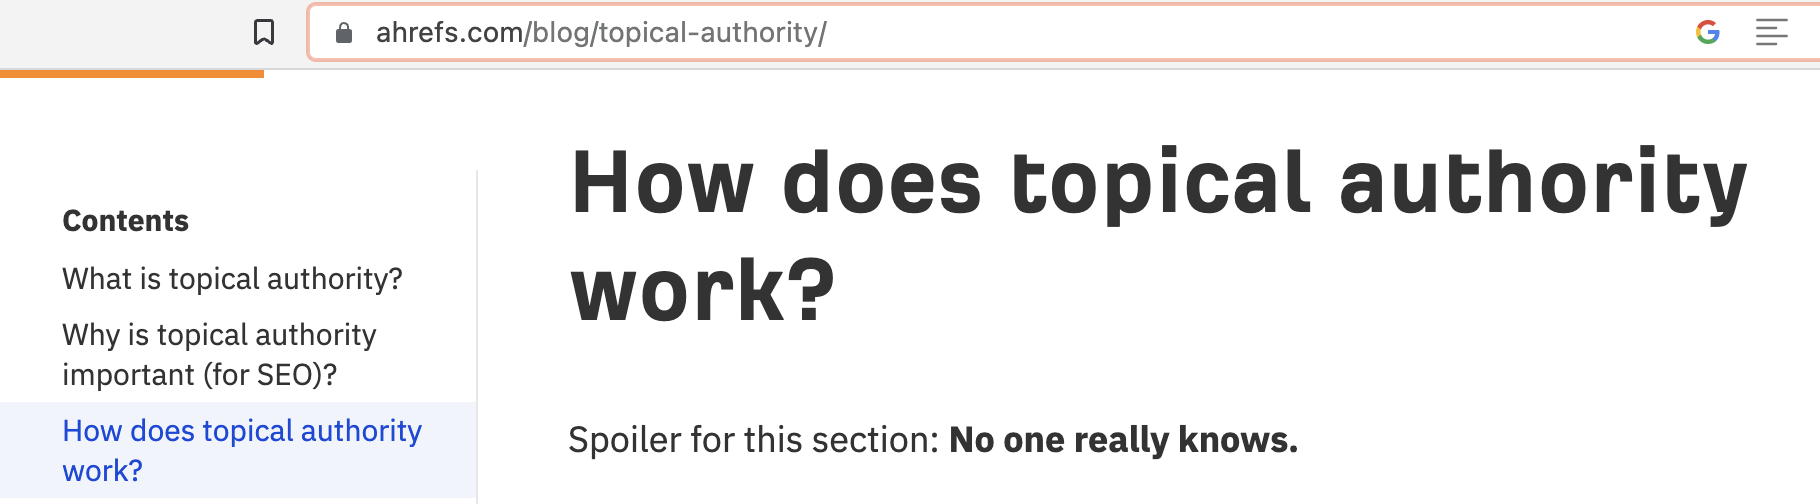 Spoiler: no one really knows how topical authority works